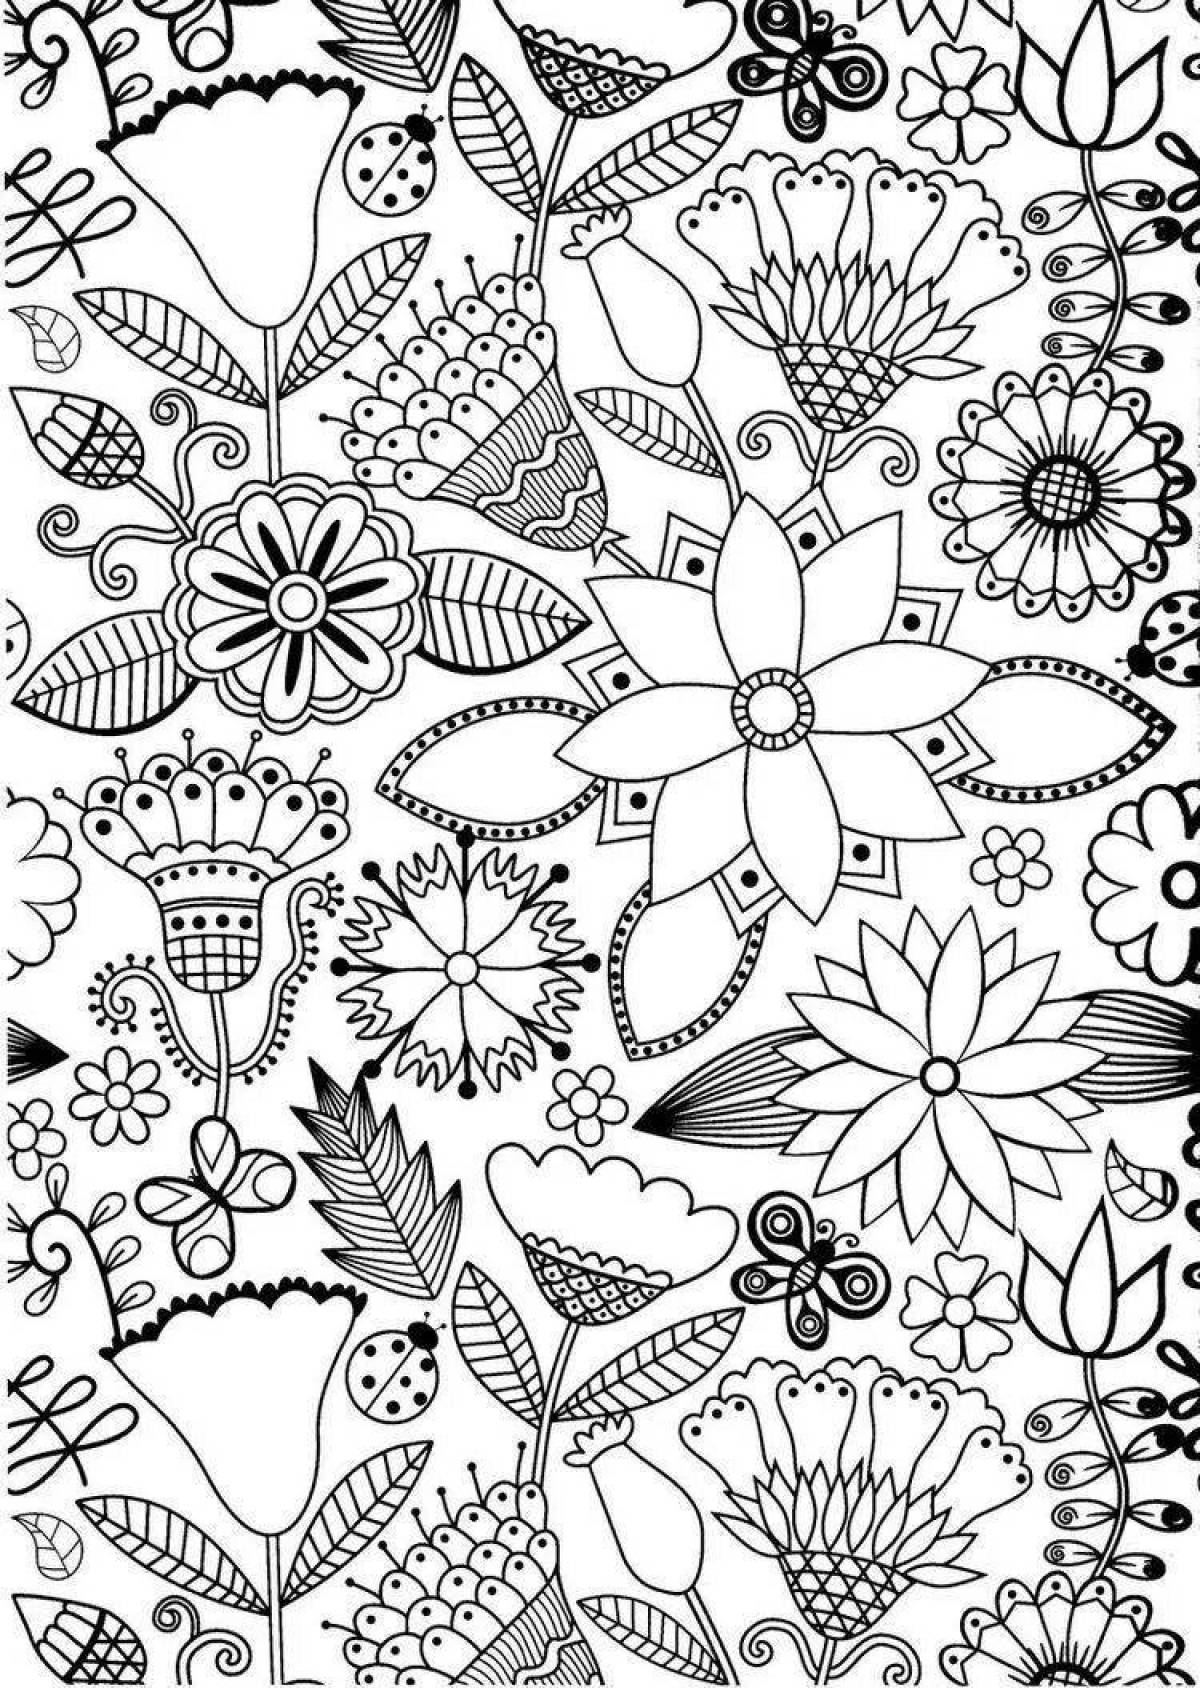 Attractive coloring pages with small patterns